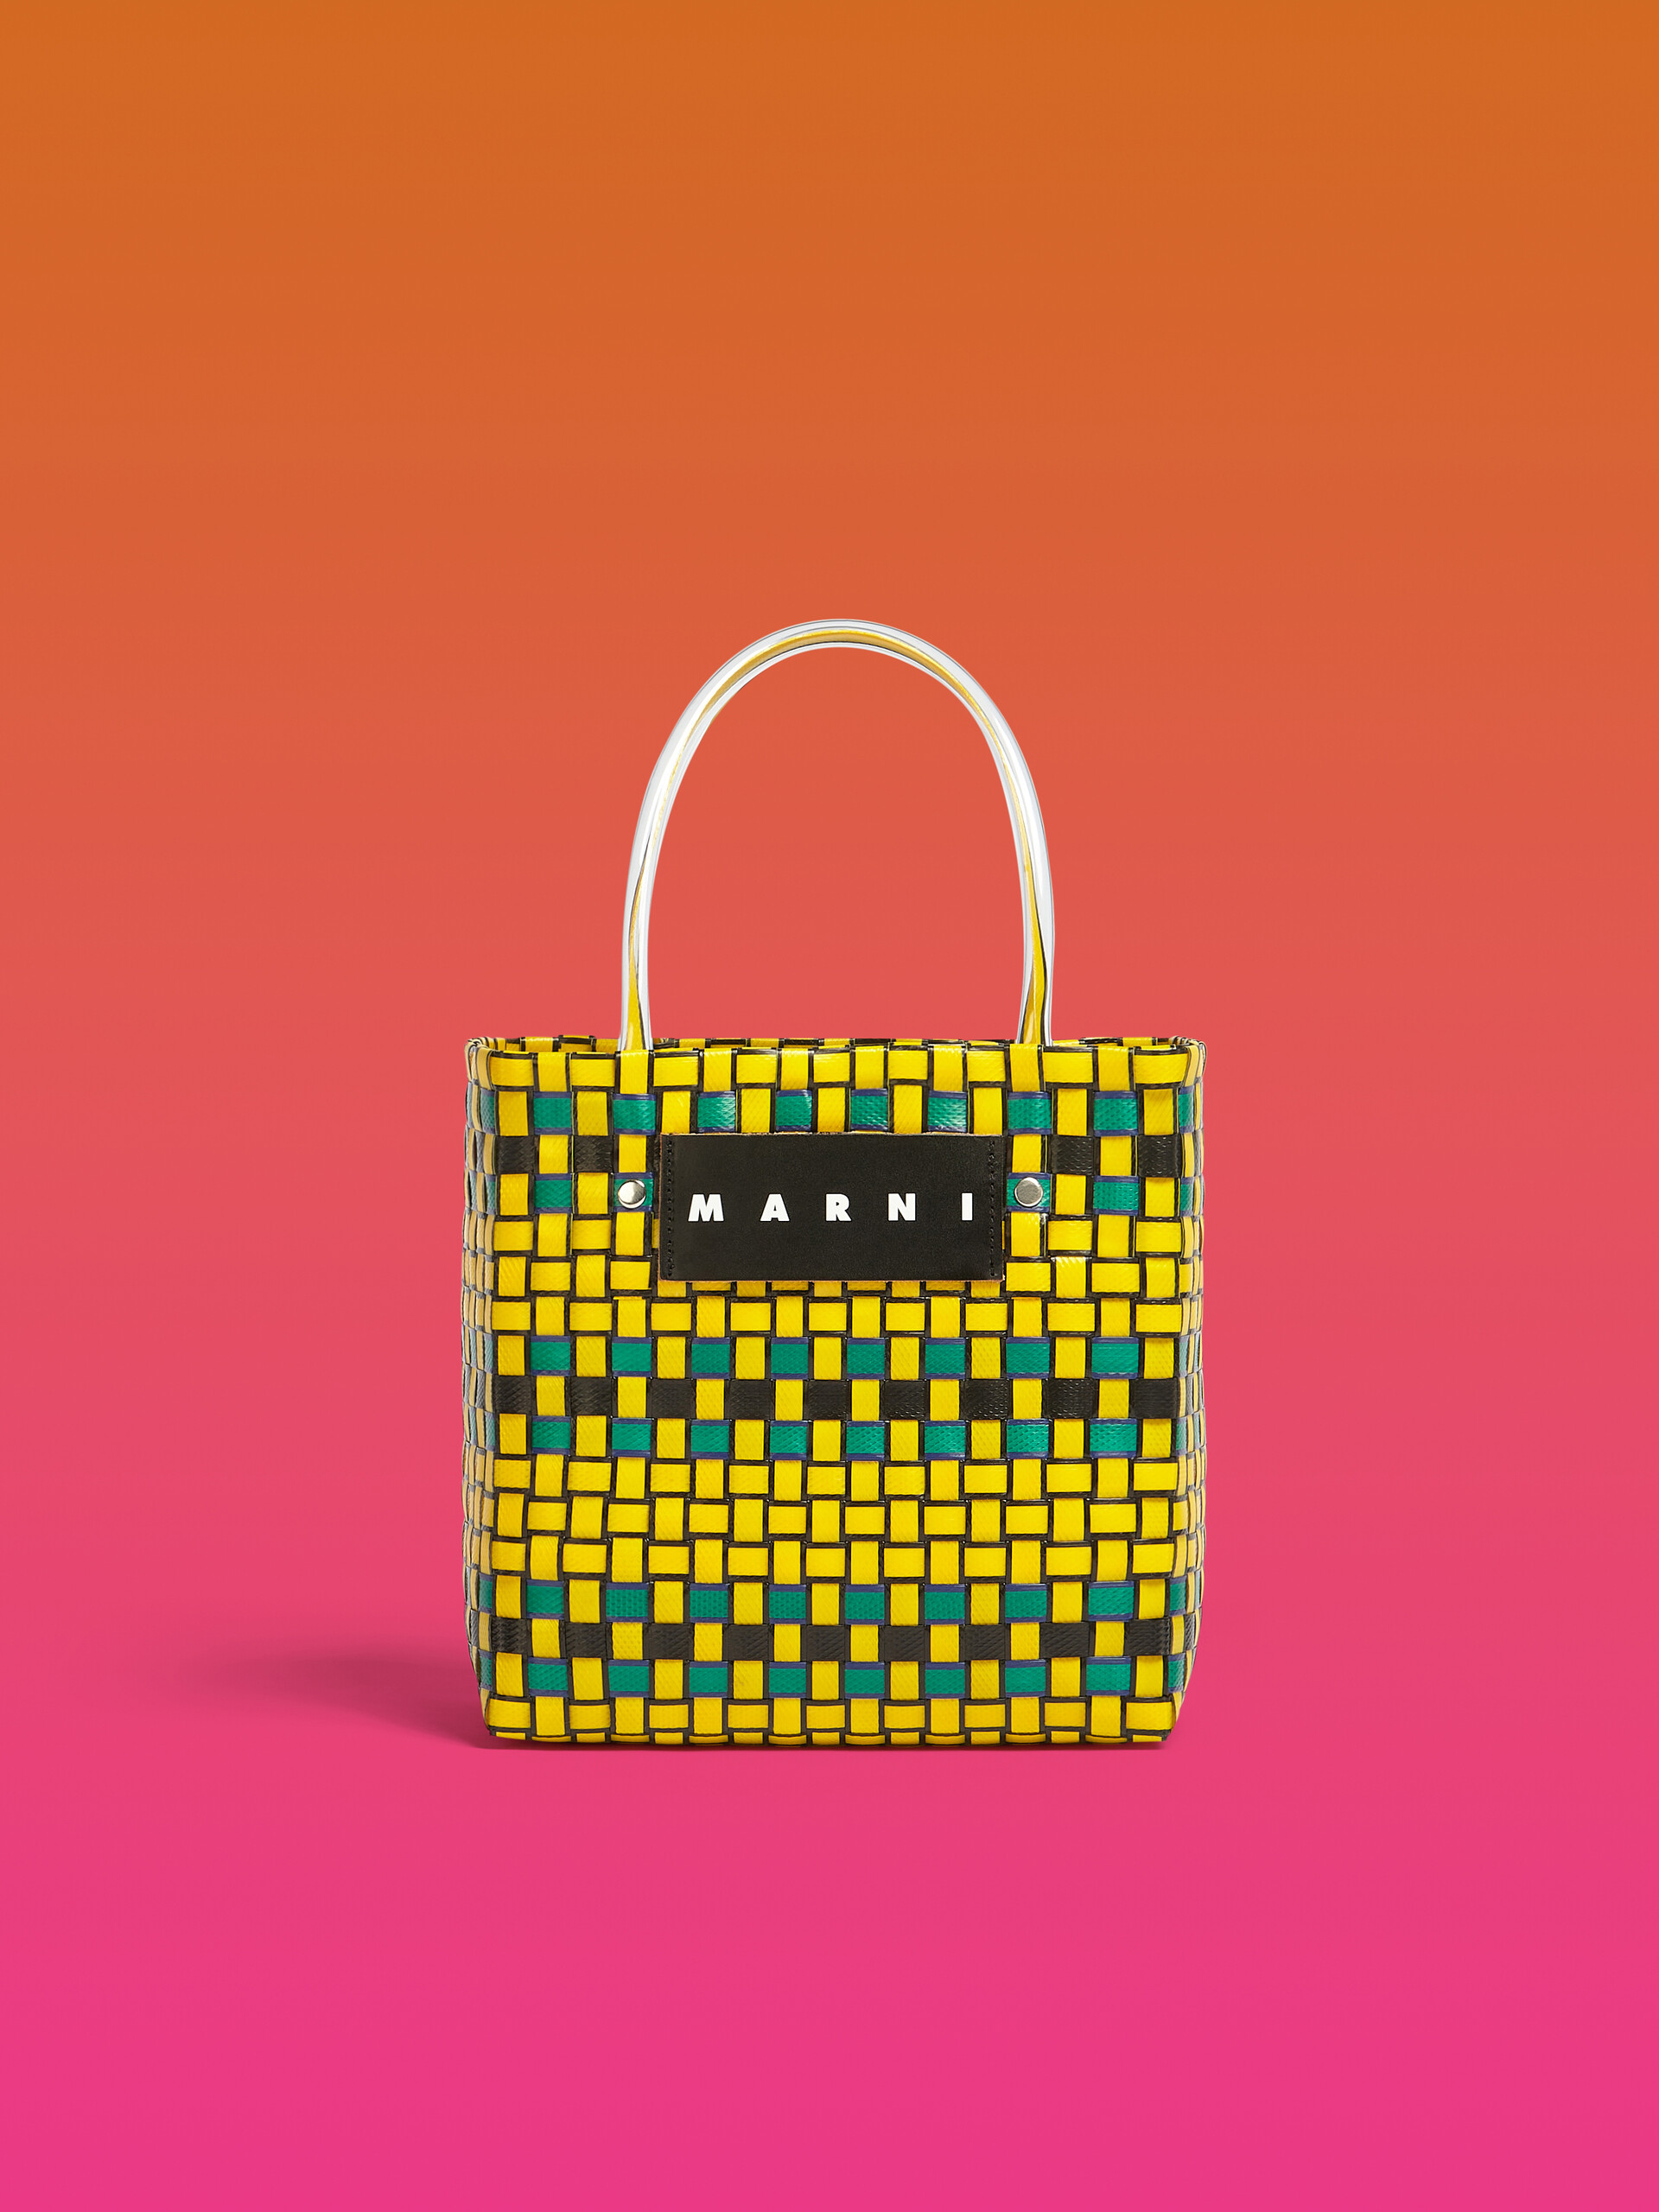 MARNI MARKET BASKET bag in yellow woven material - Shopping Bags - Image 1